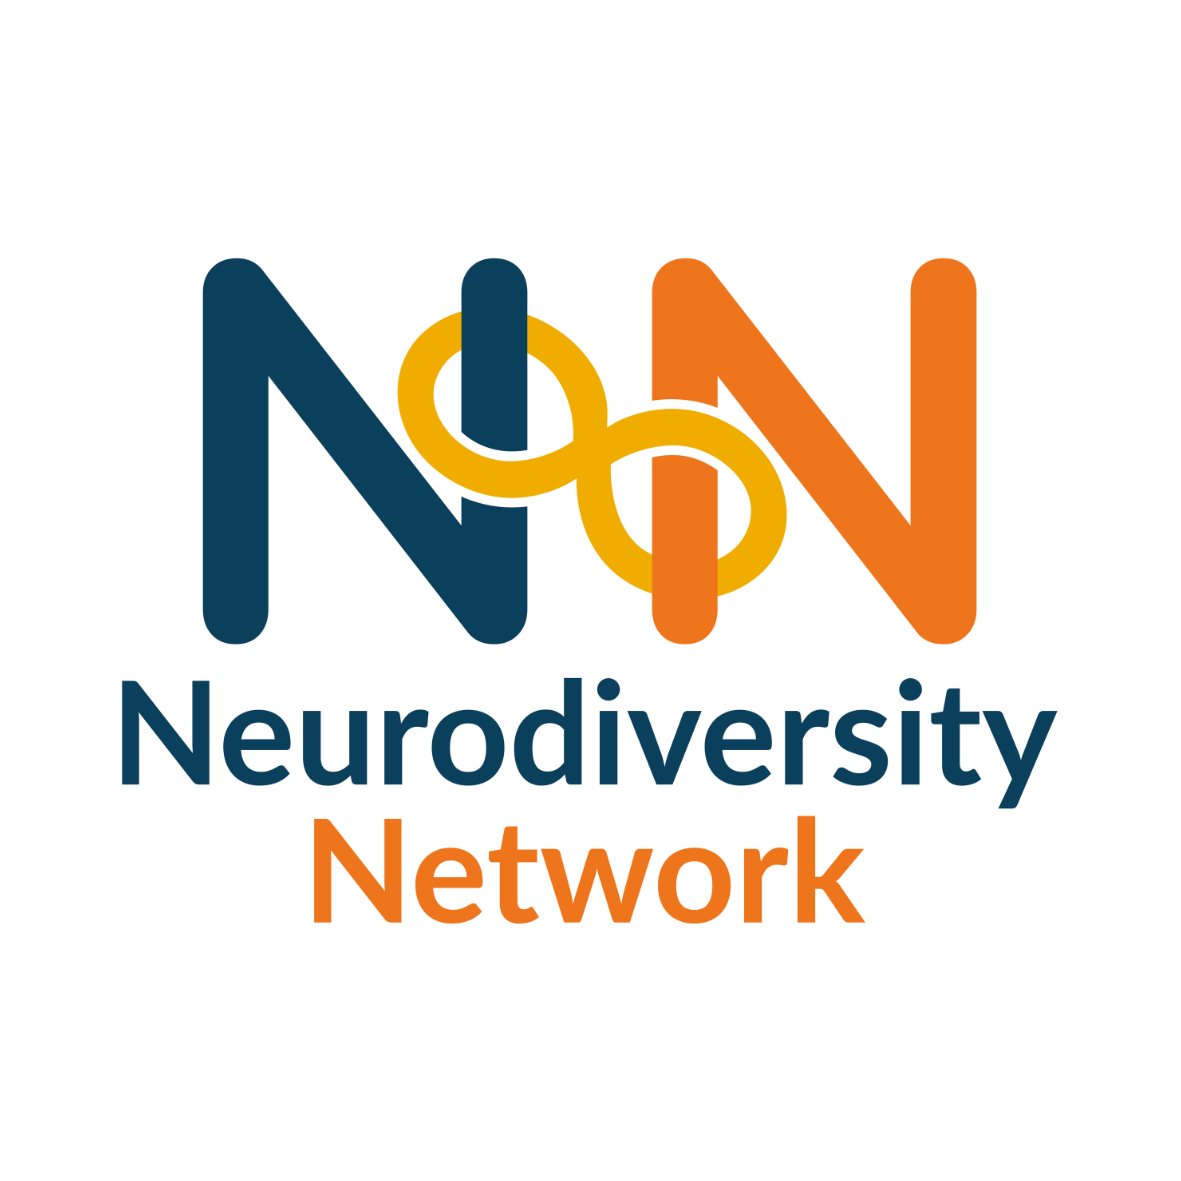 logo is two letter Ns with a n infinity symbol linking them and Neurodiversity Network underneath